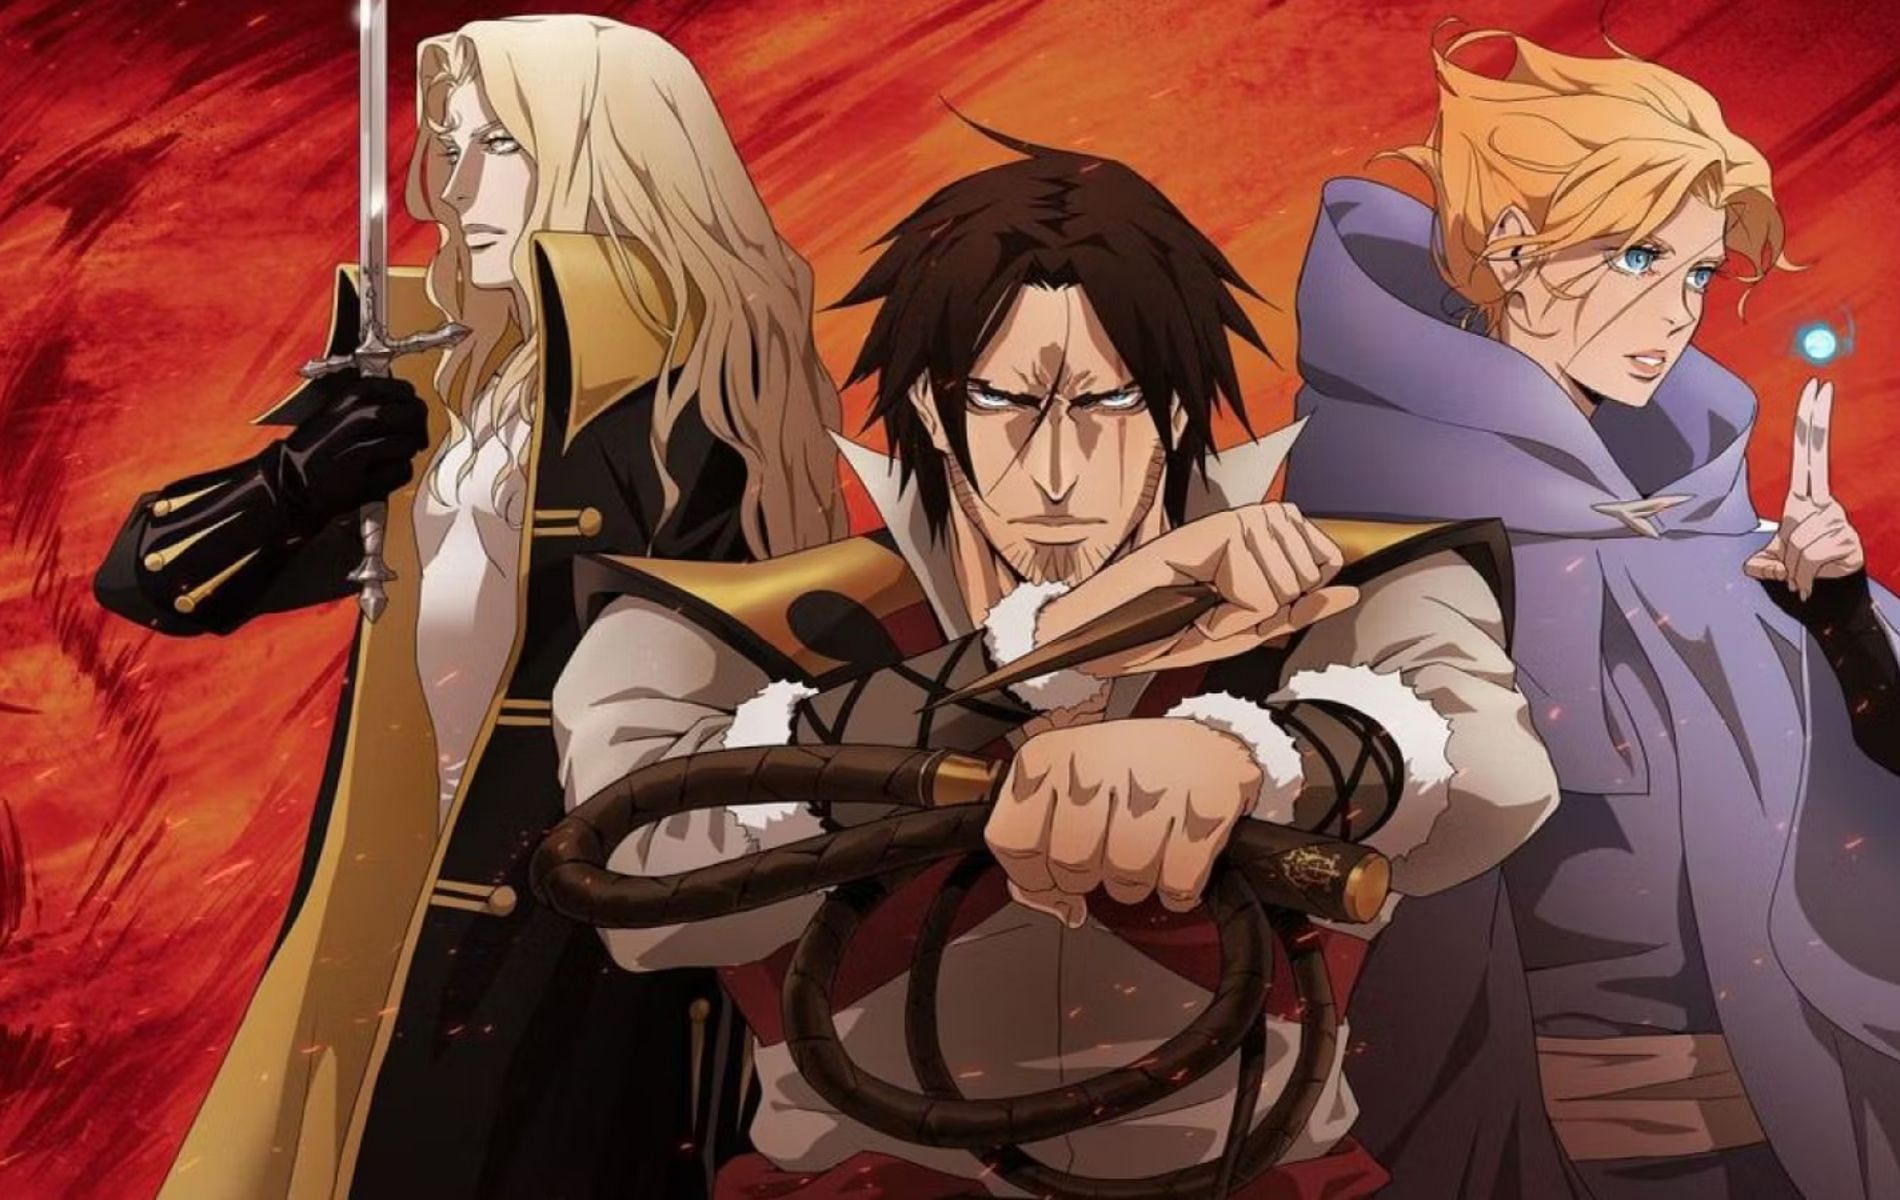 Cover art featuring various Castlevania charcters from the anime show by Konami